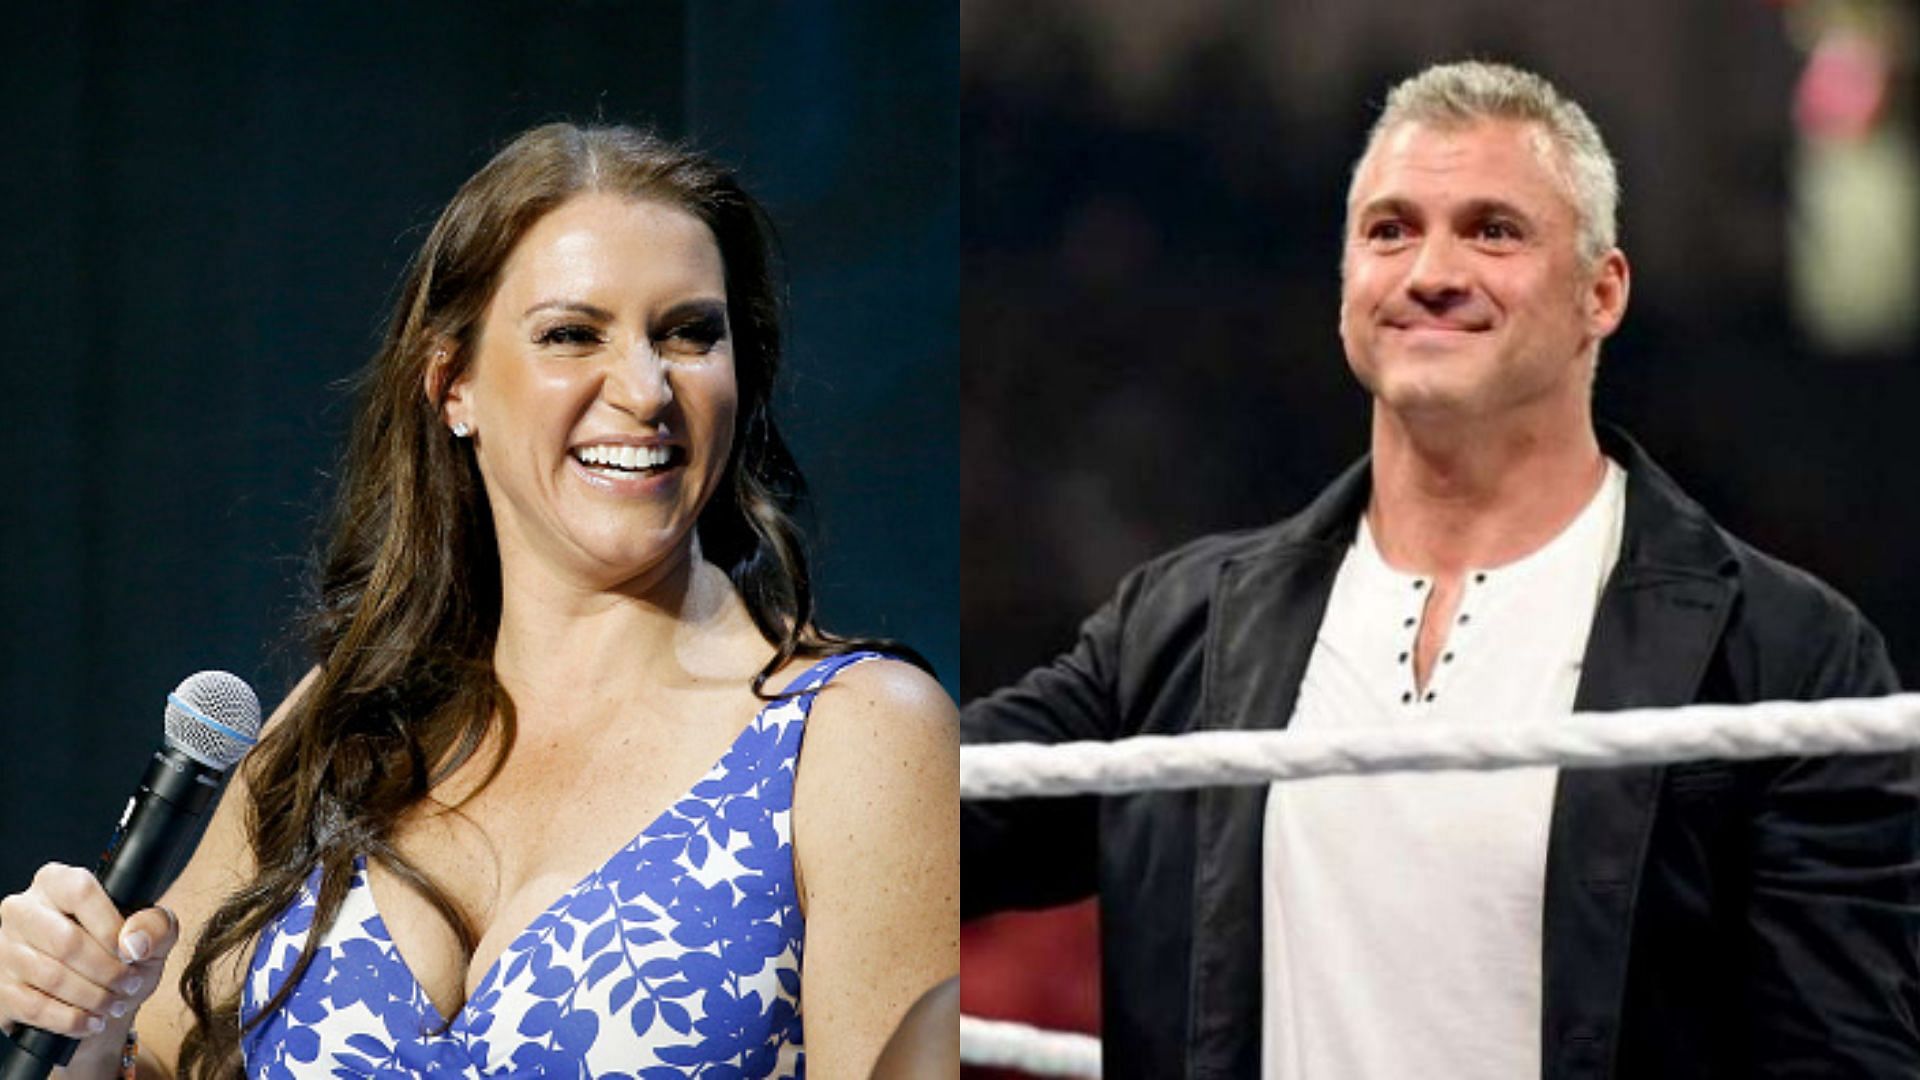 Stephanie &amp; Shane McMahon have been highly influential figures in WWE